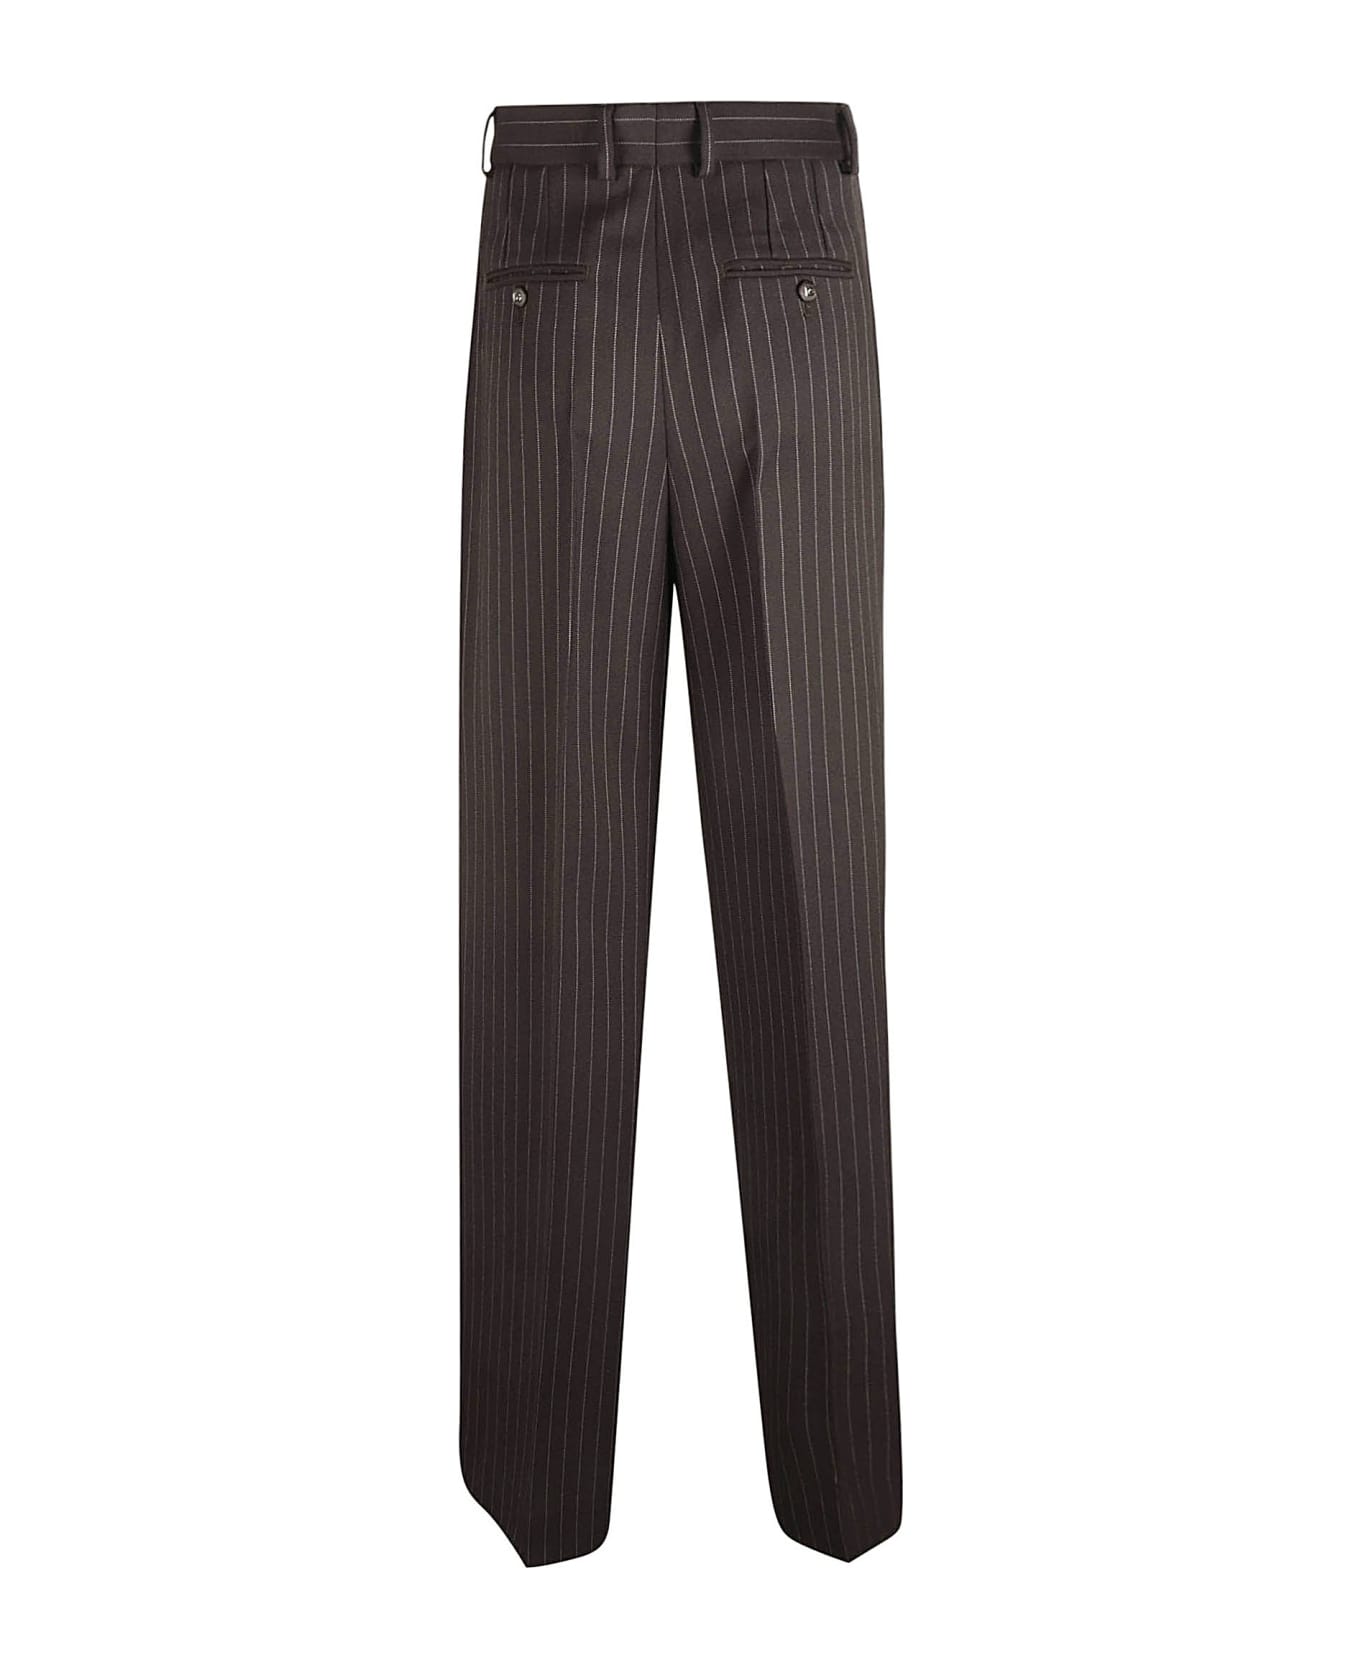 Dolce & Gabbana Pinstripe made Trousers - BROWN